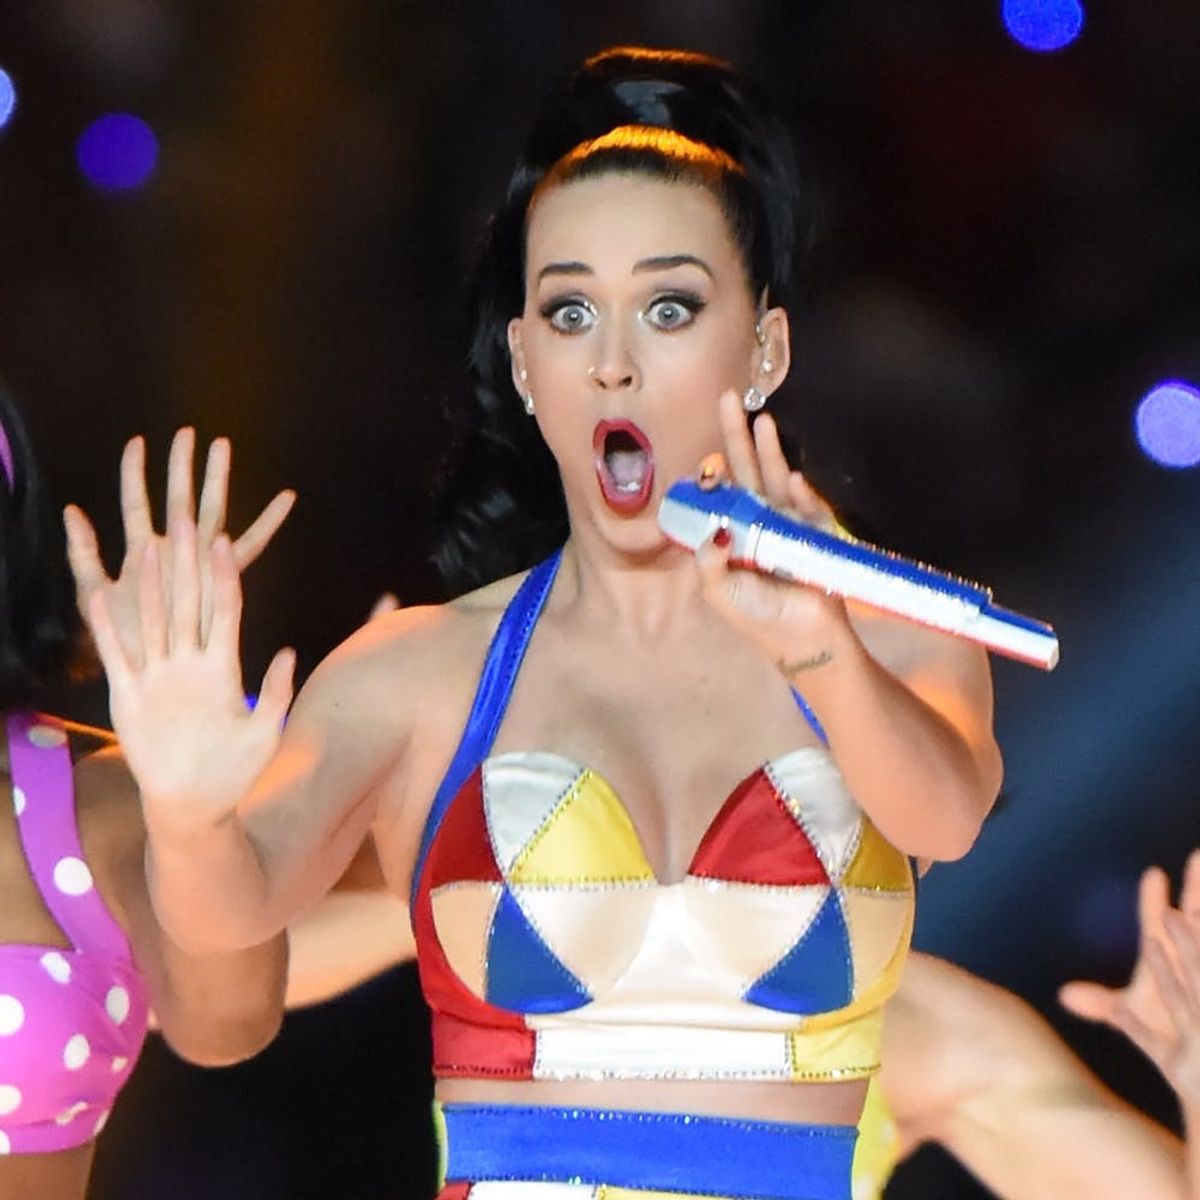 The 9 Most OMG Moments in Super Bowl Halftime Show History